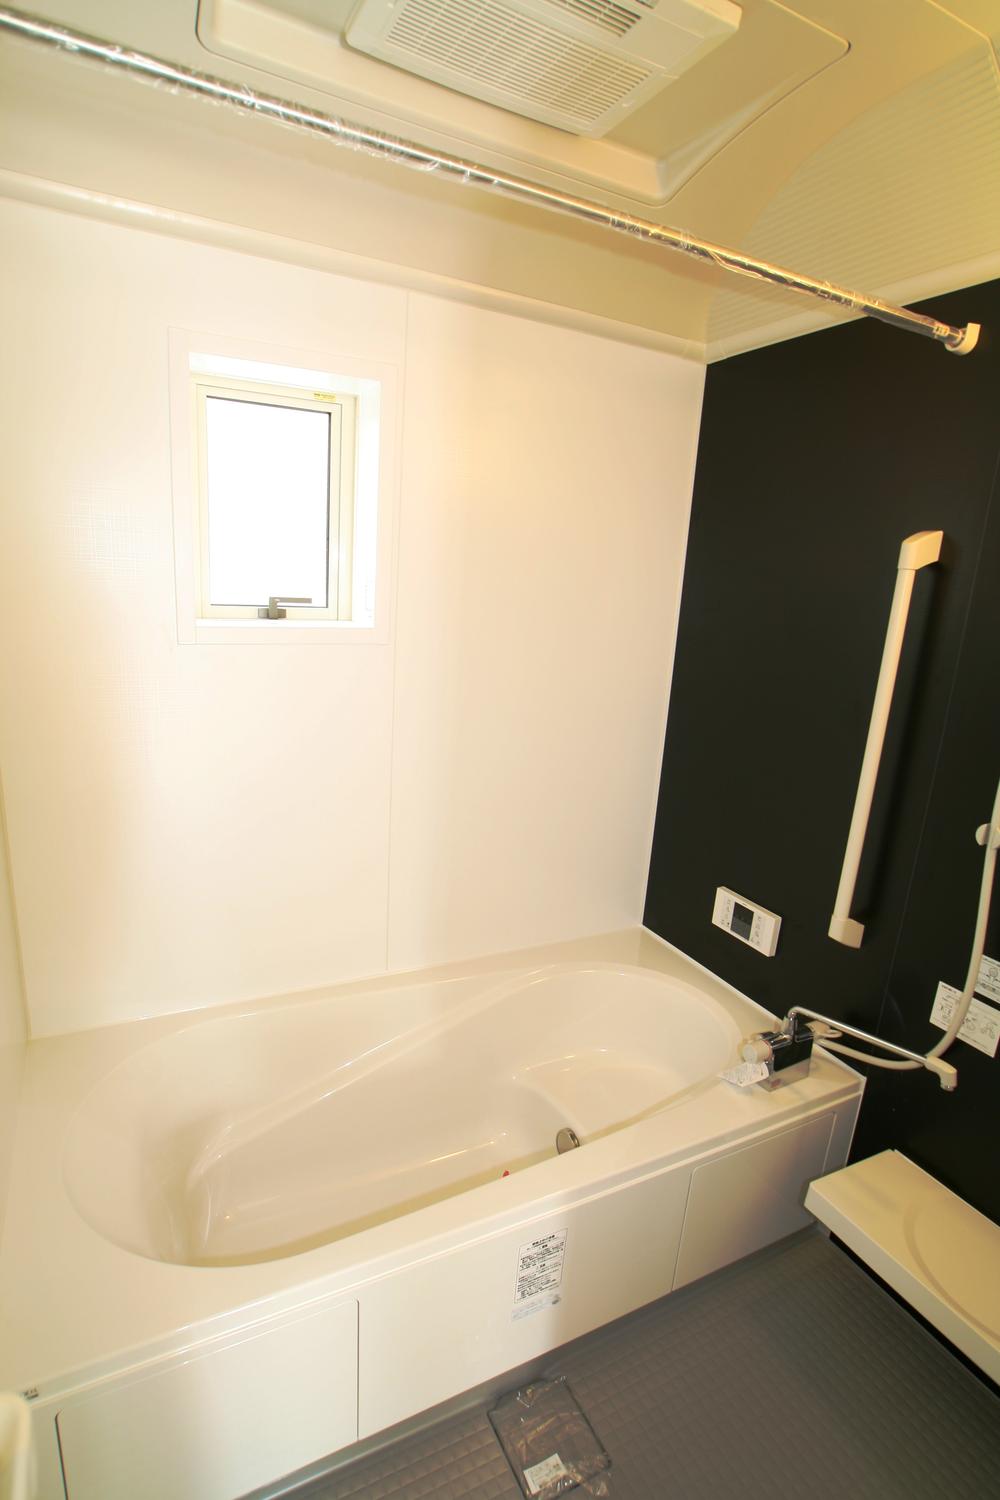 Same specifications photo (bathroom). With drying heater (cool breeze with function)